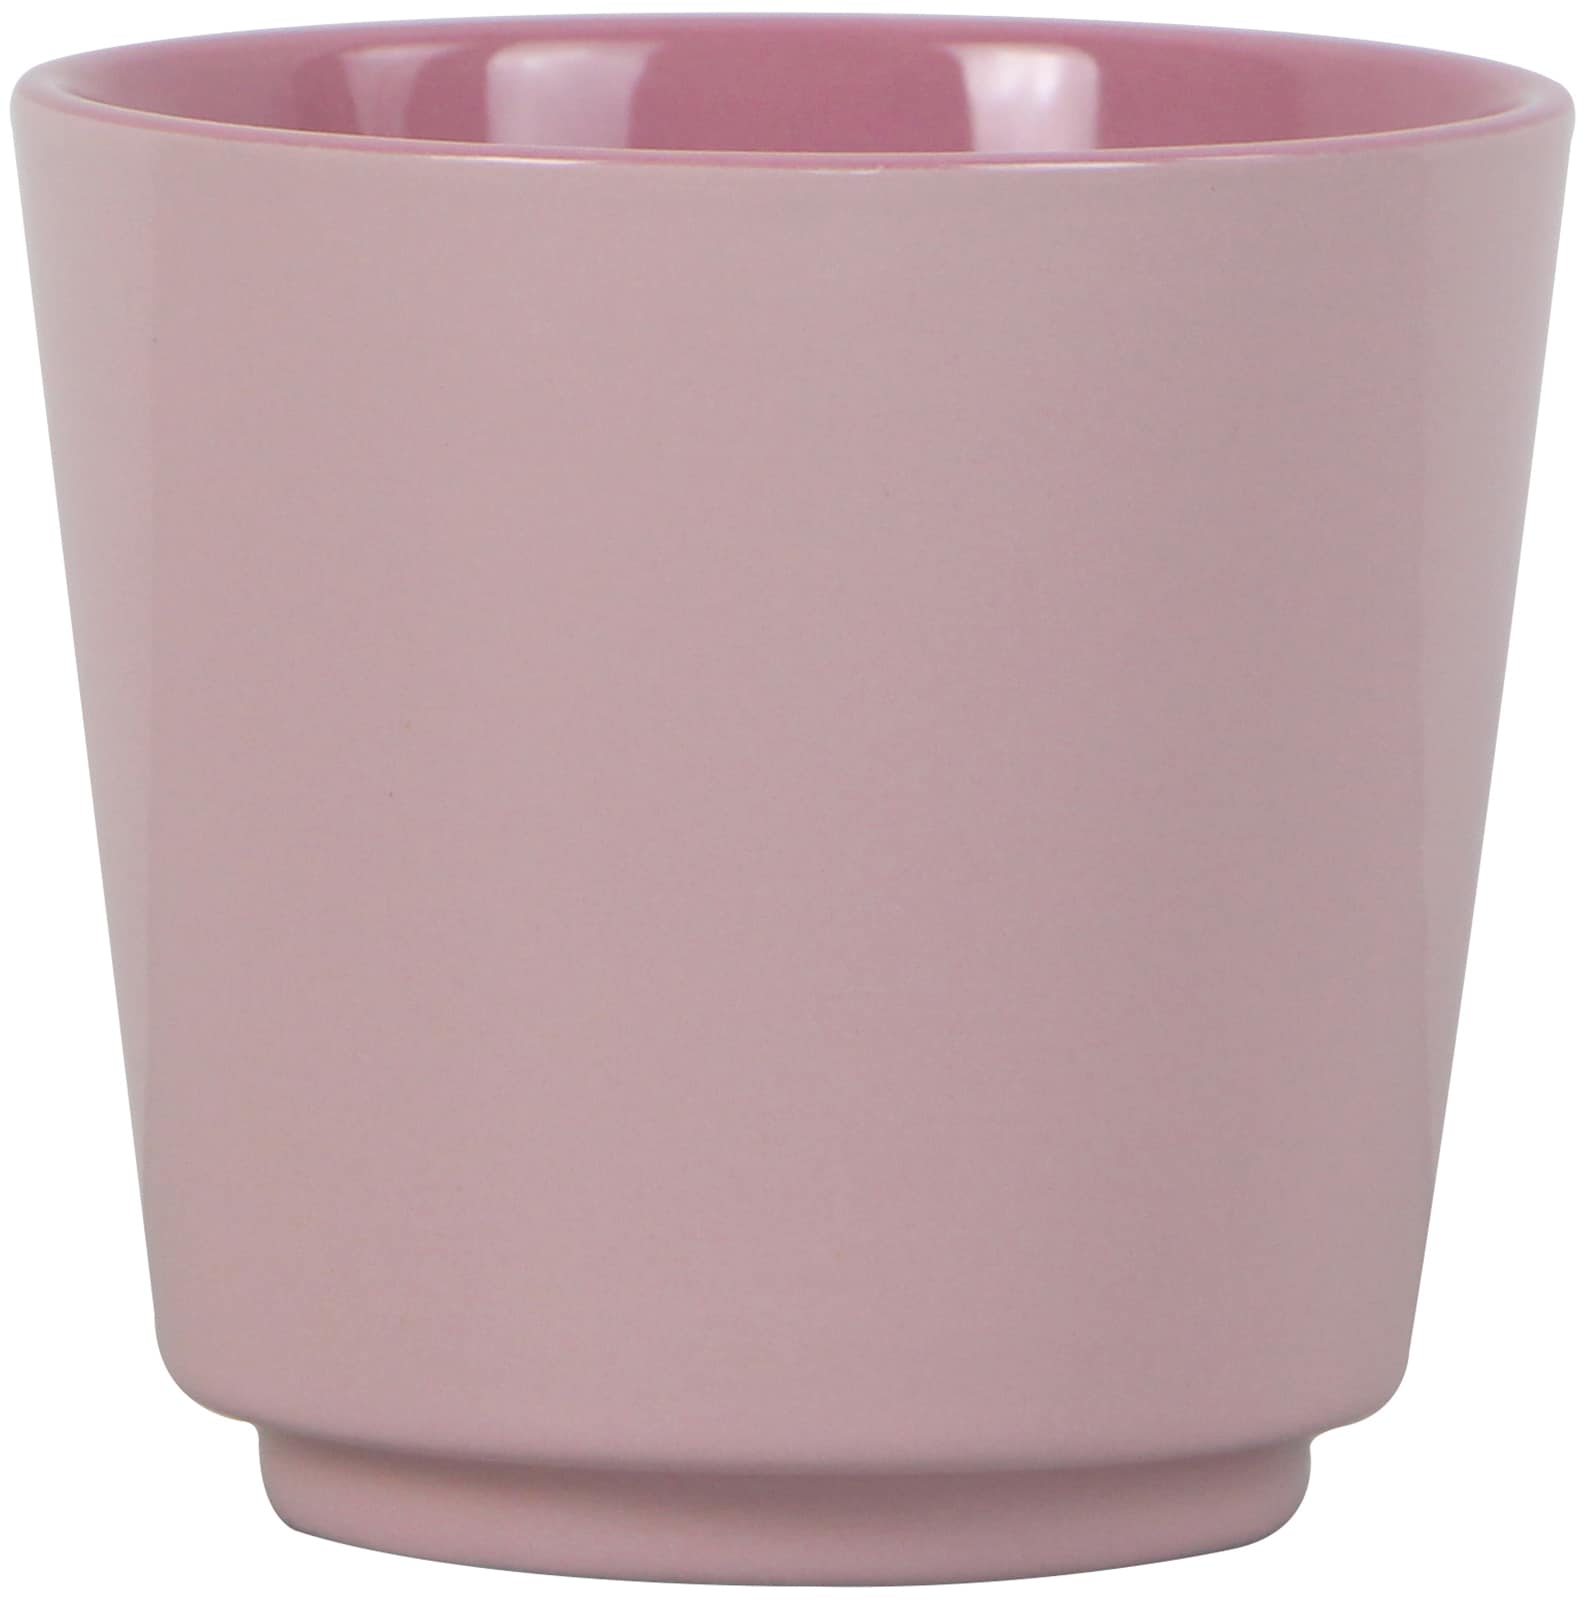 4.13-in department the x Indoor & Pink allen Planters Planter W H roth at 3.74-in Pots Ceramic in +